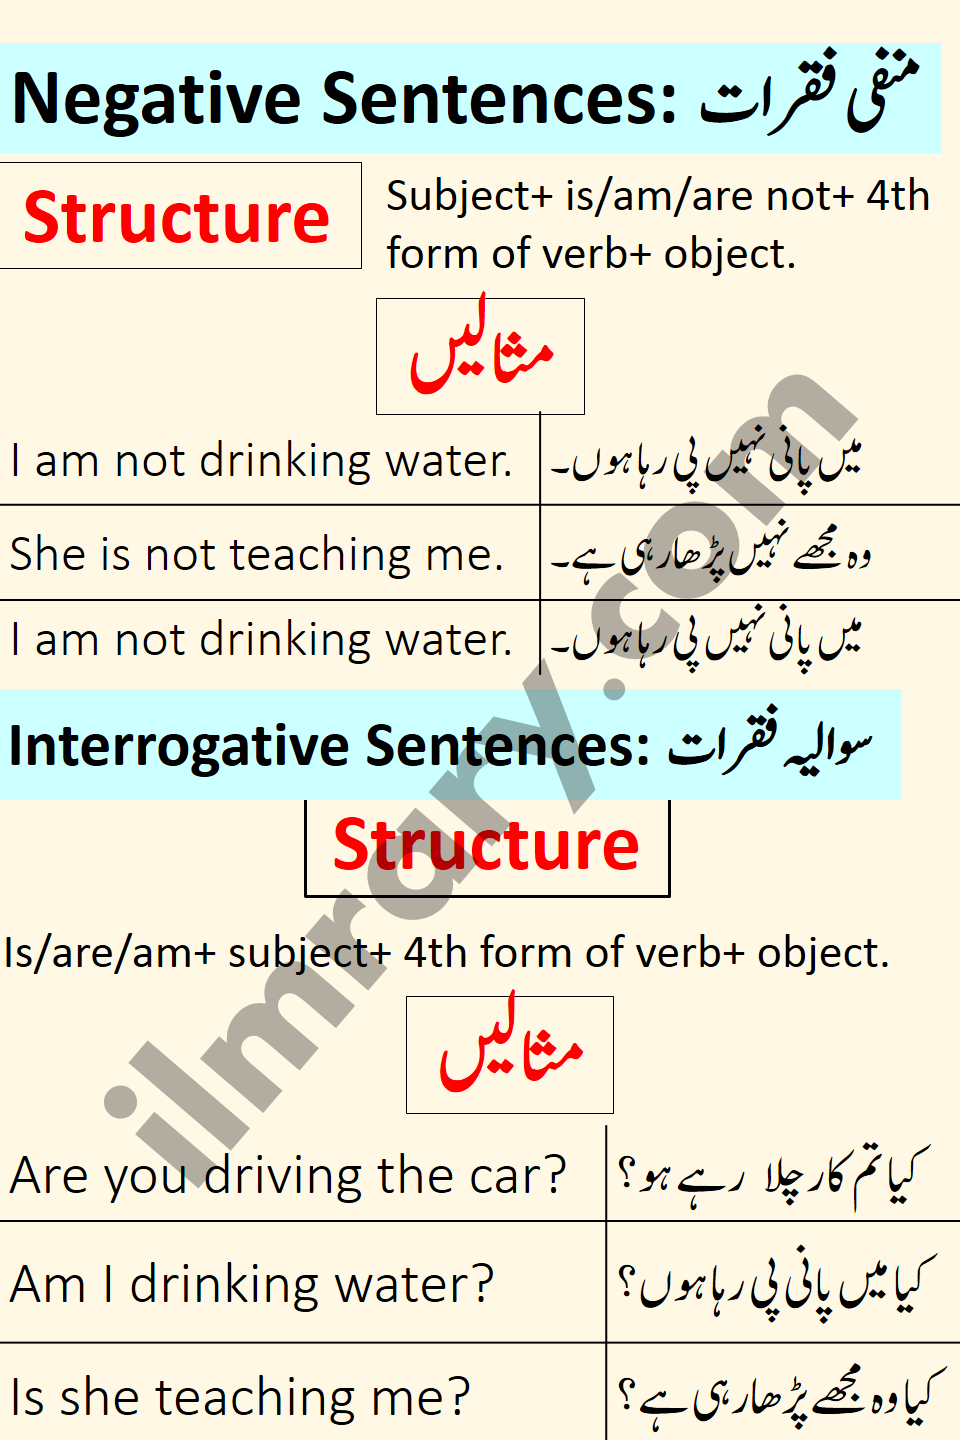 Interrogative and Negative Examples for Present Continuous Tense in urdu